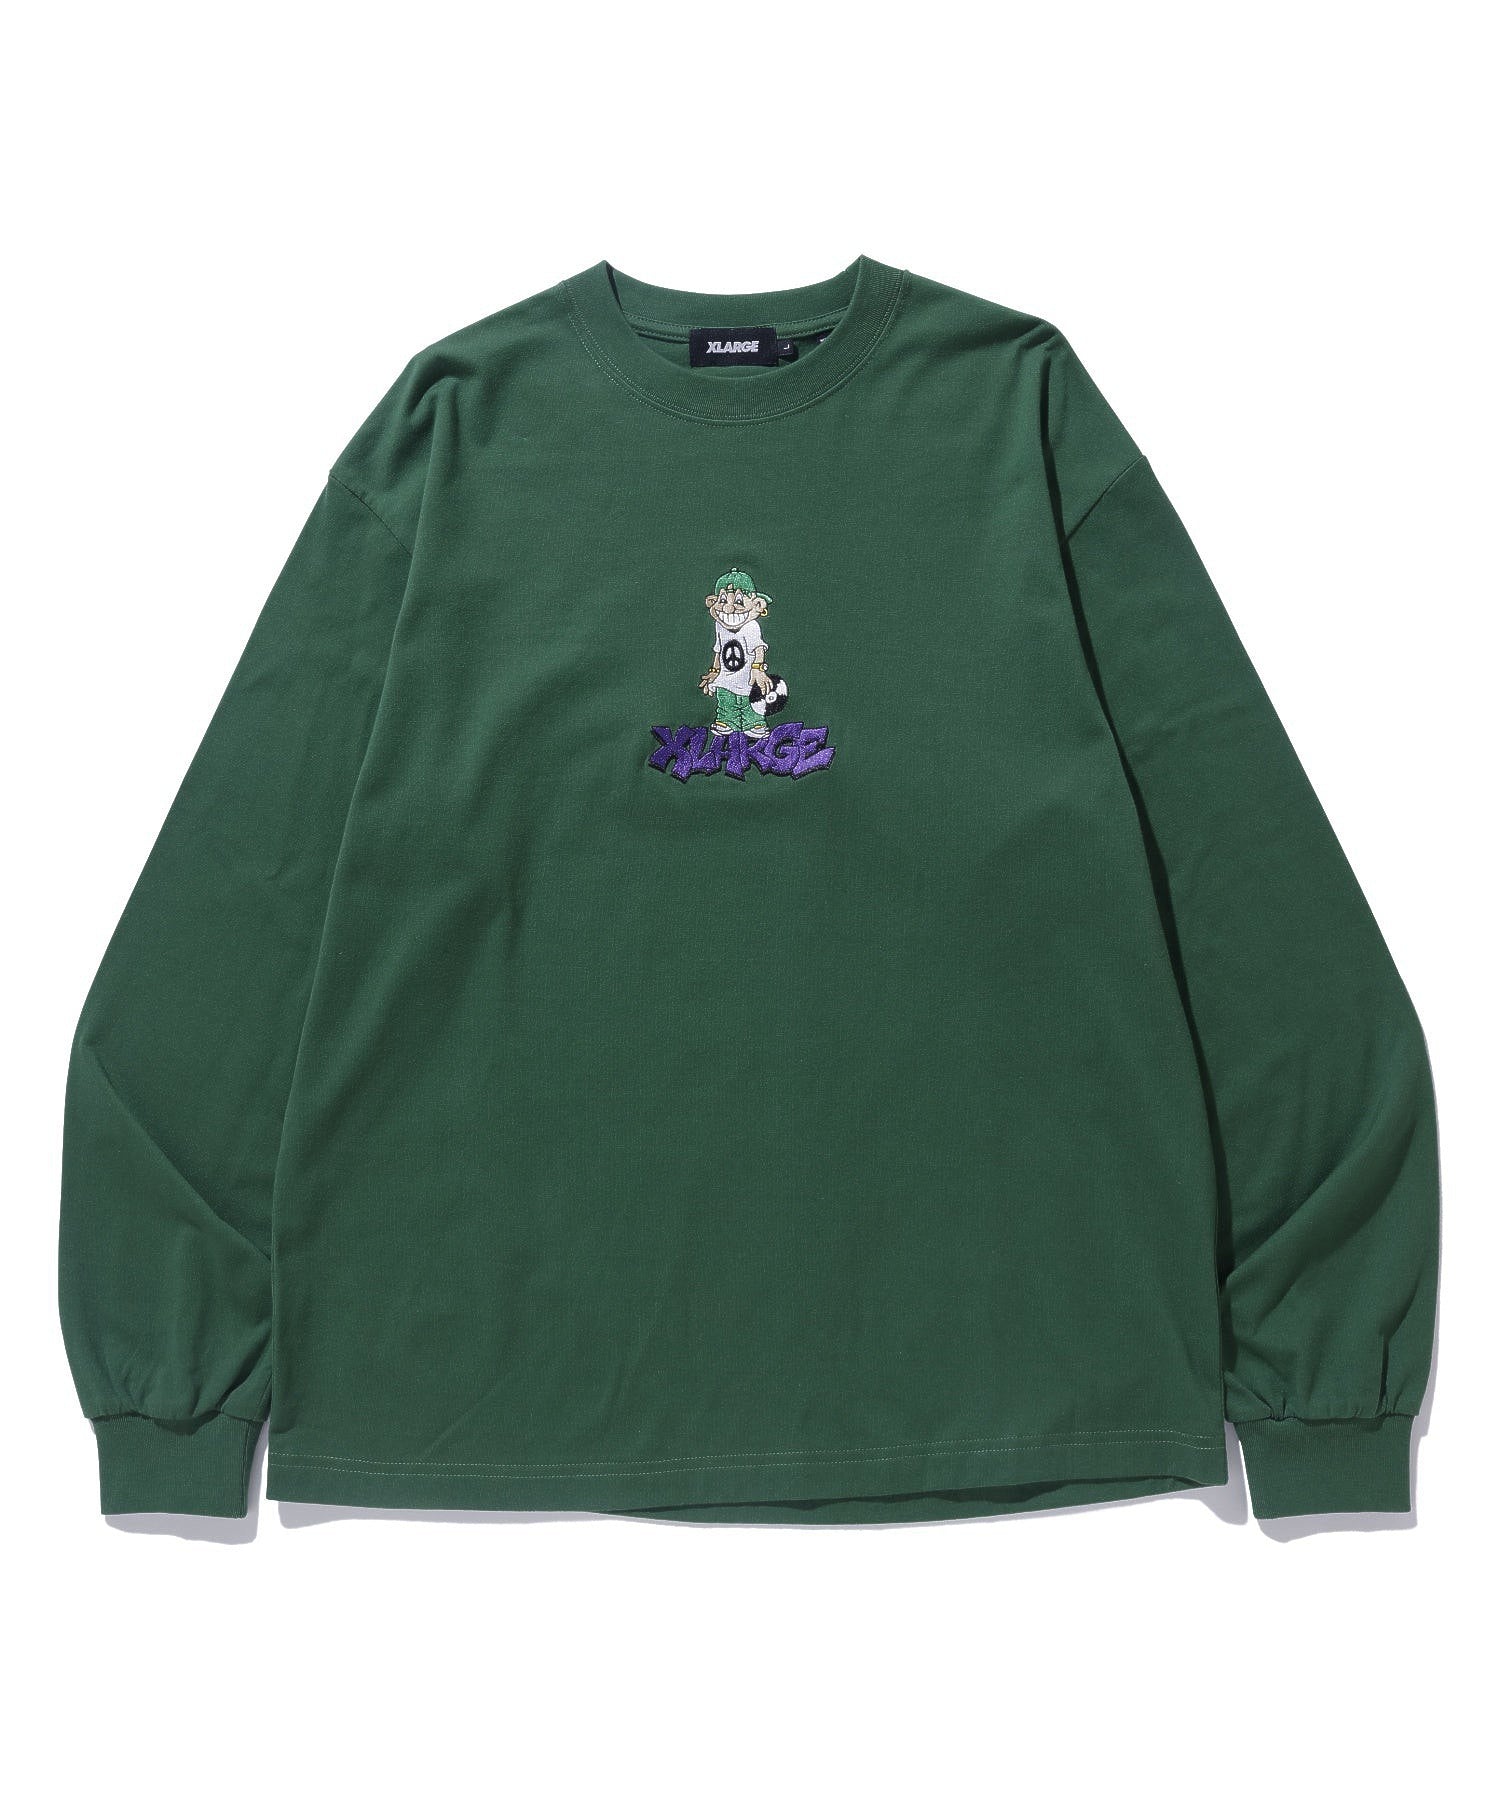 MUSIC LOVER L/S TEE XLARGE